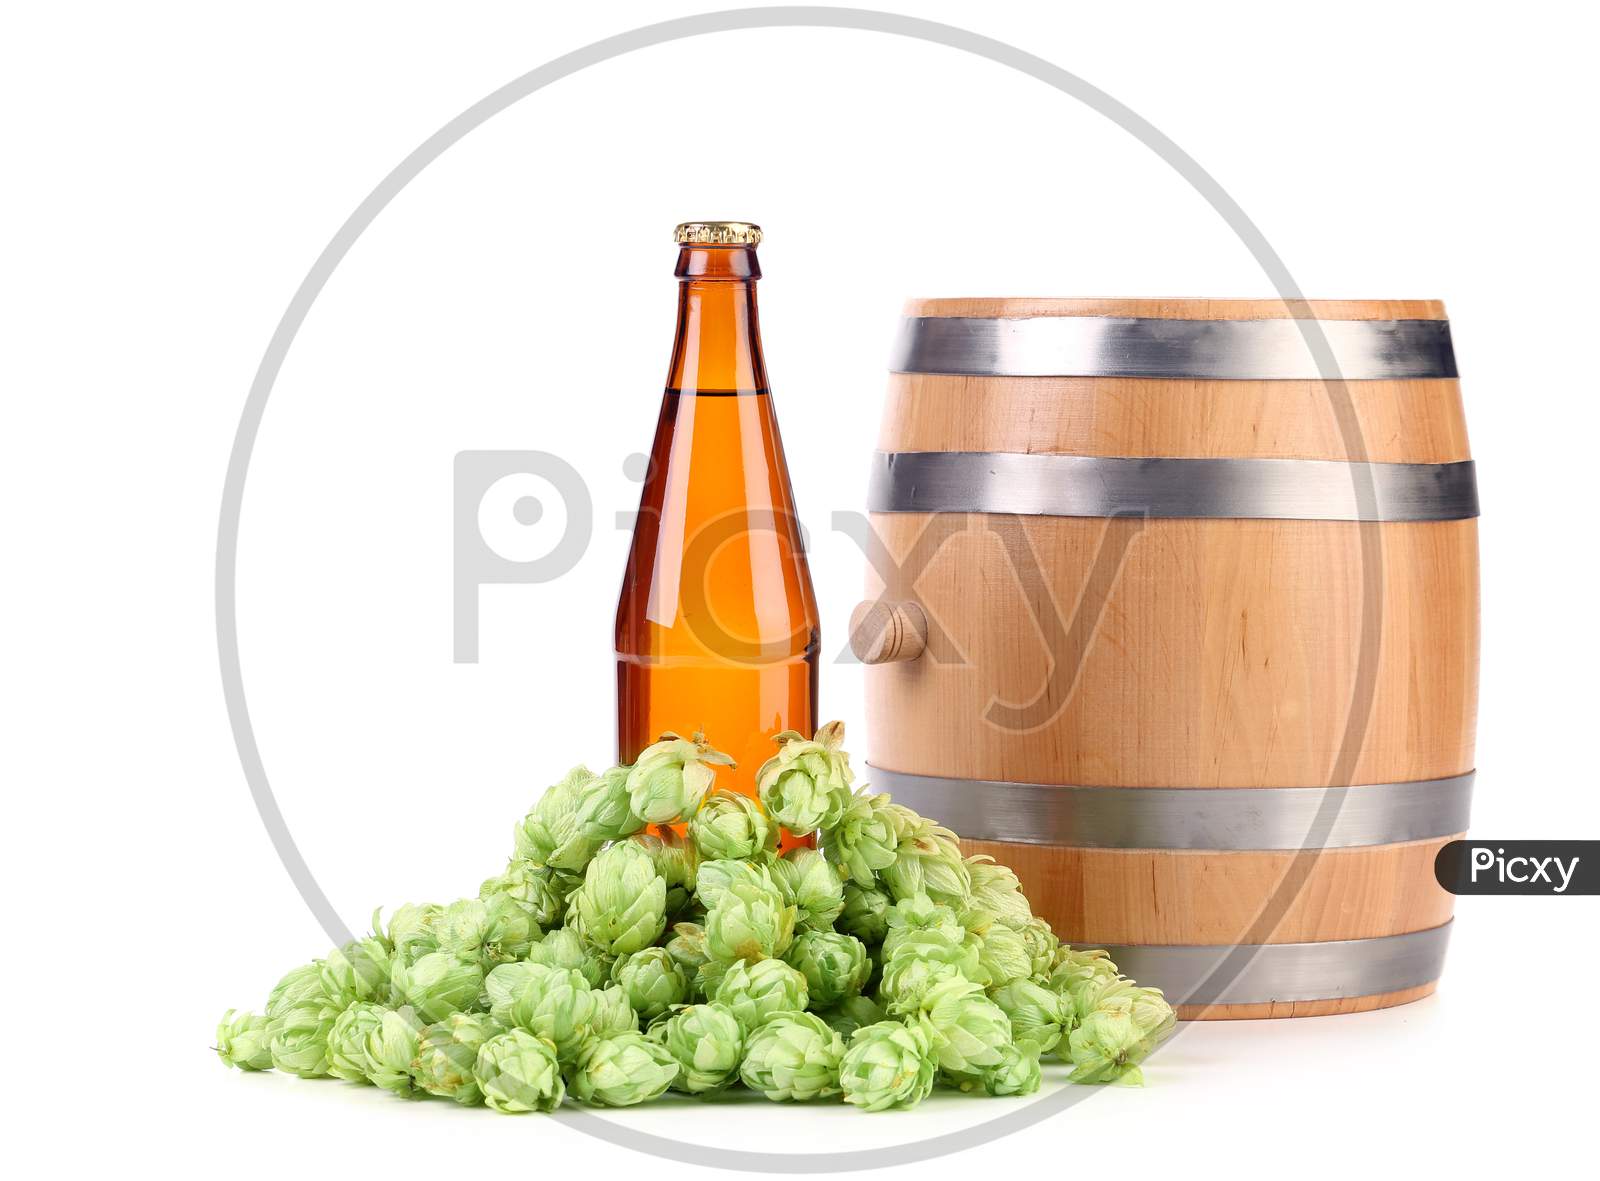 Barrel And Bottle Of Beer With Hop. Isolated On A White Background.